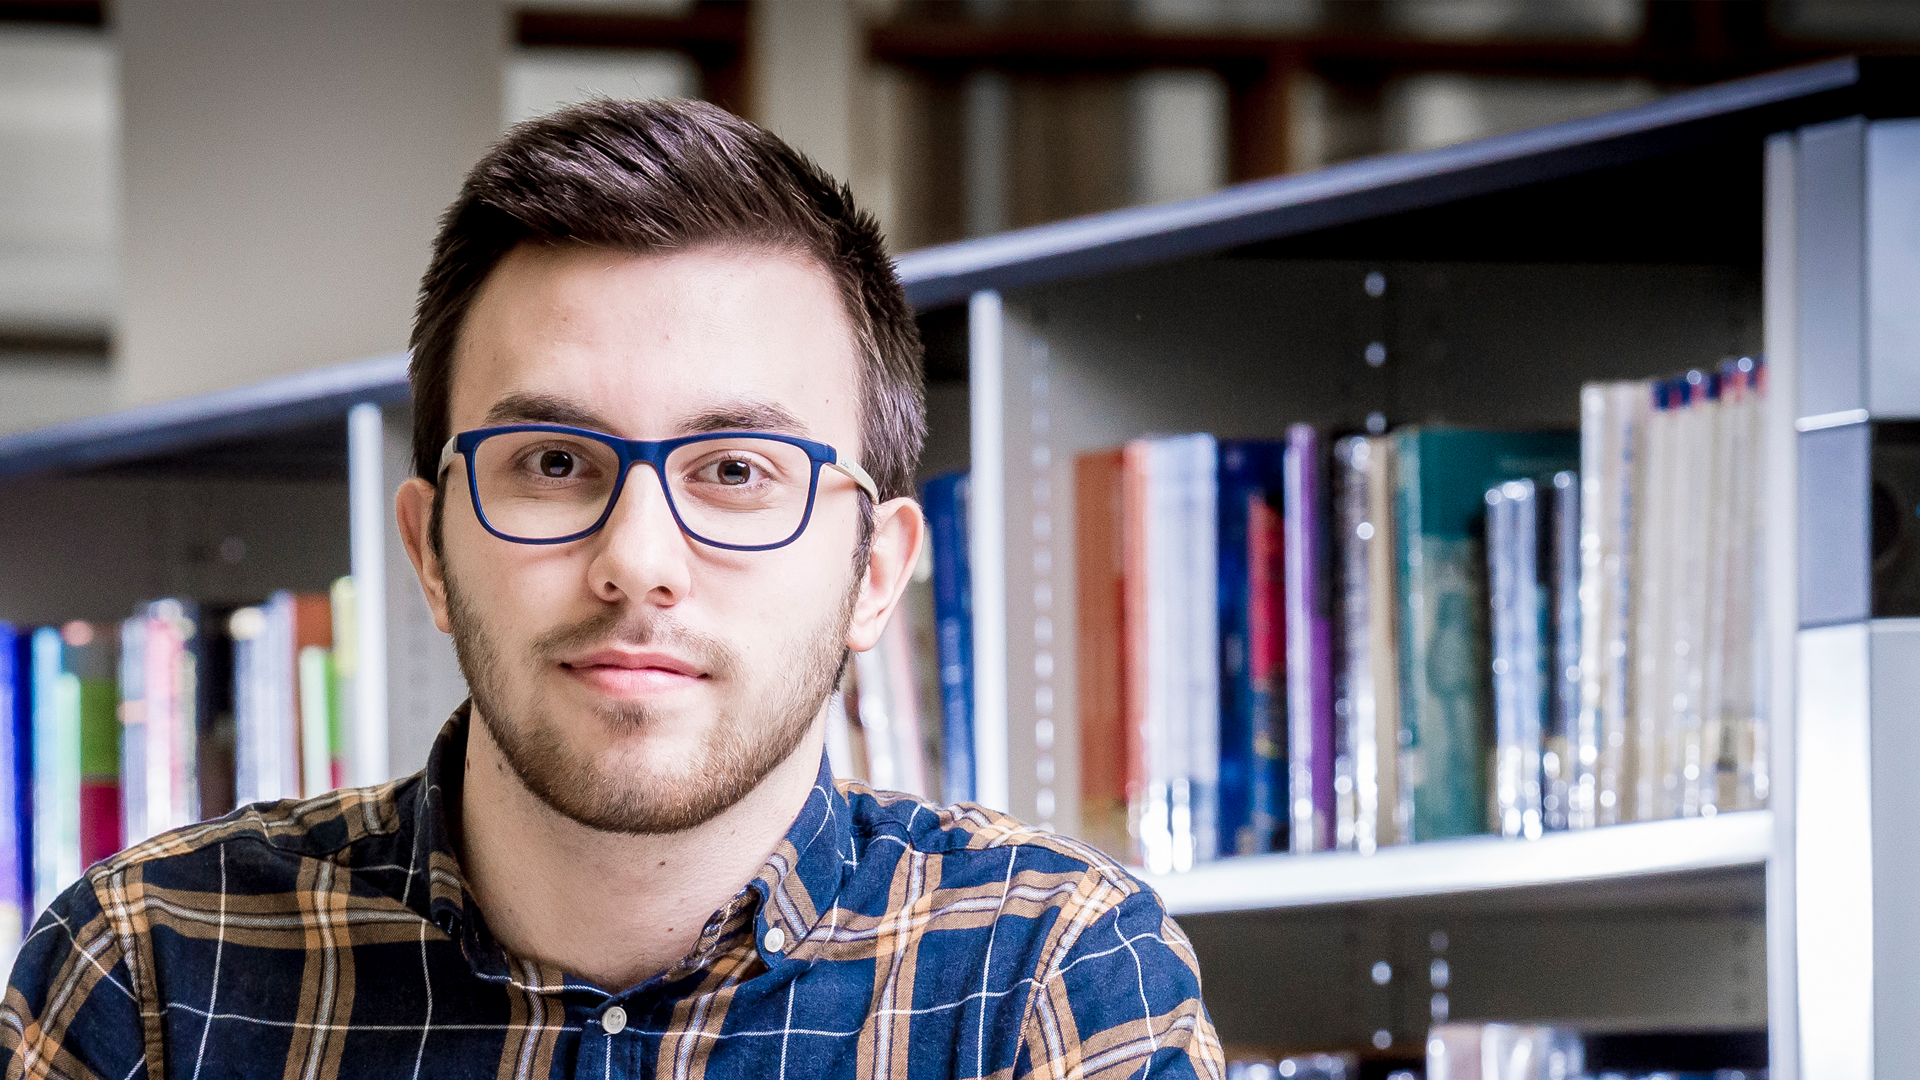 male student sitting in front of a shelf of books